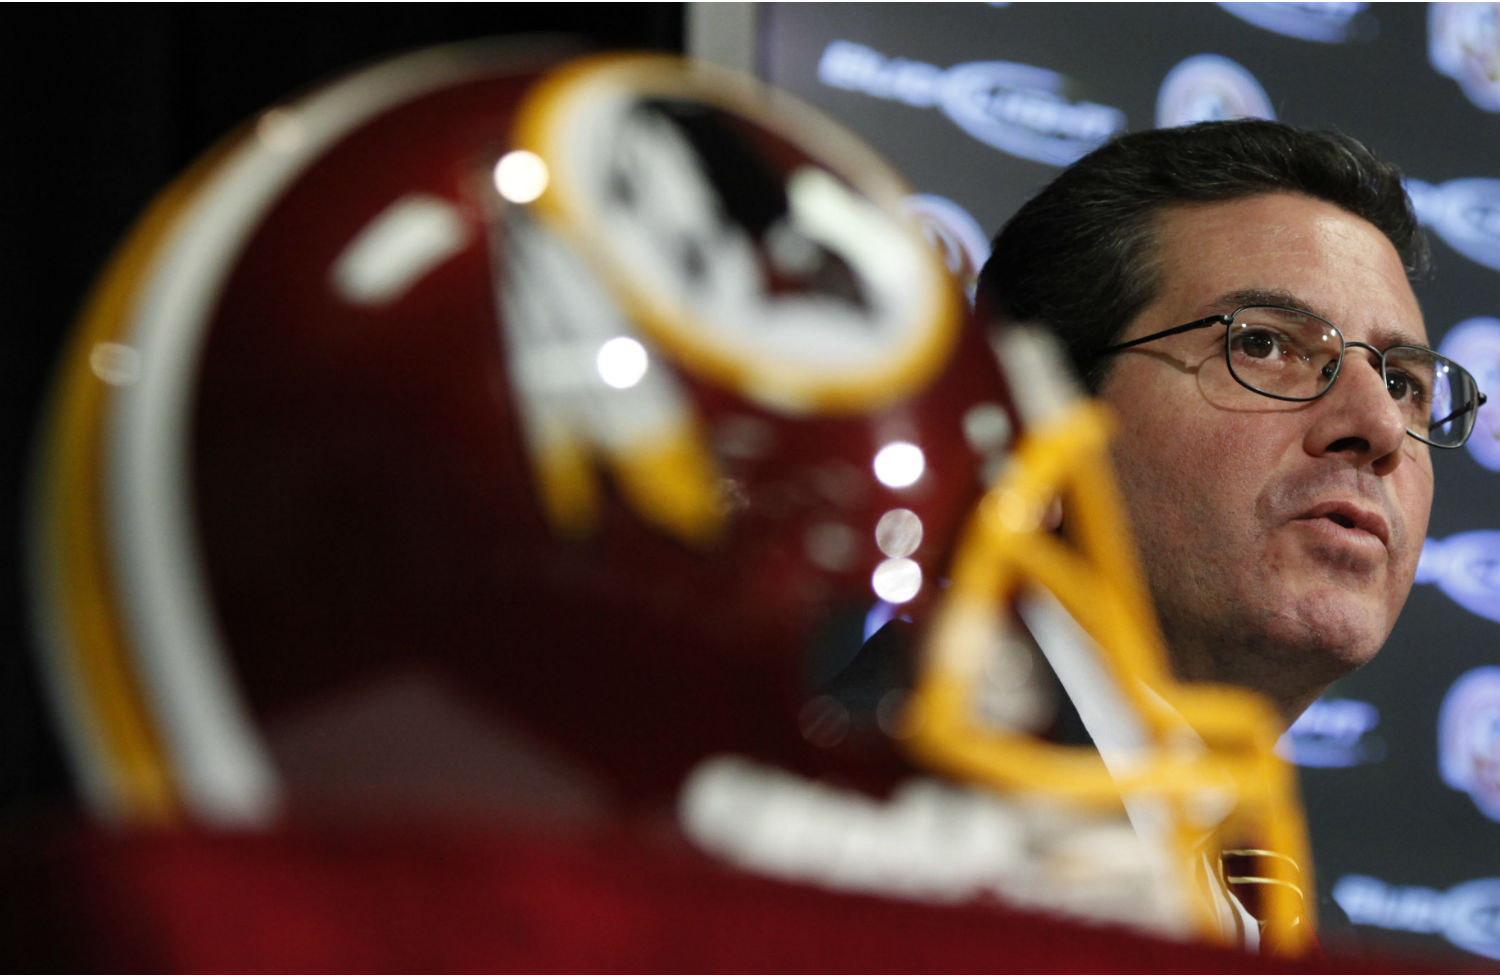 On Seeing Dan Snyder at an Event to Promote Racial Justice